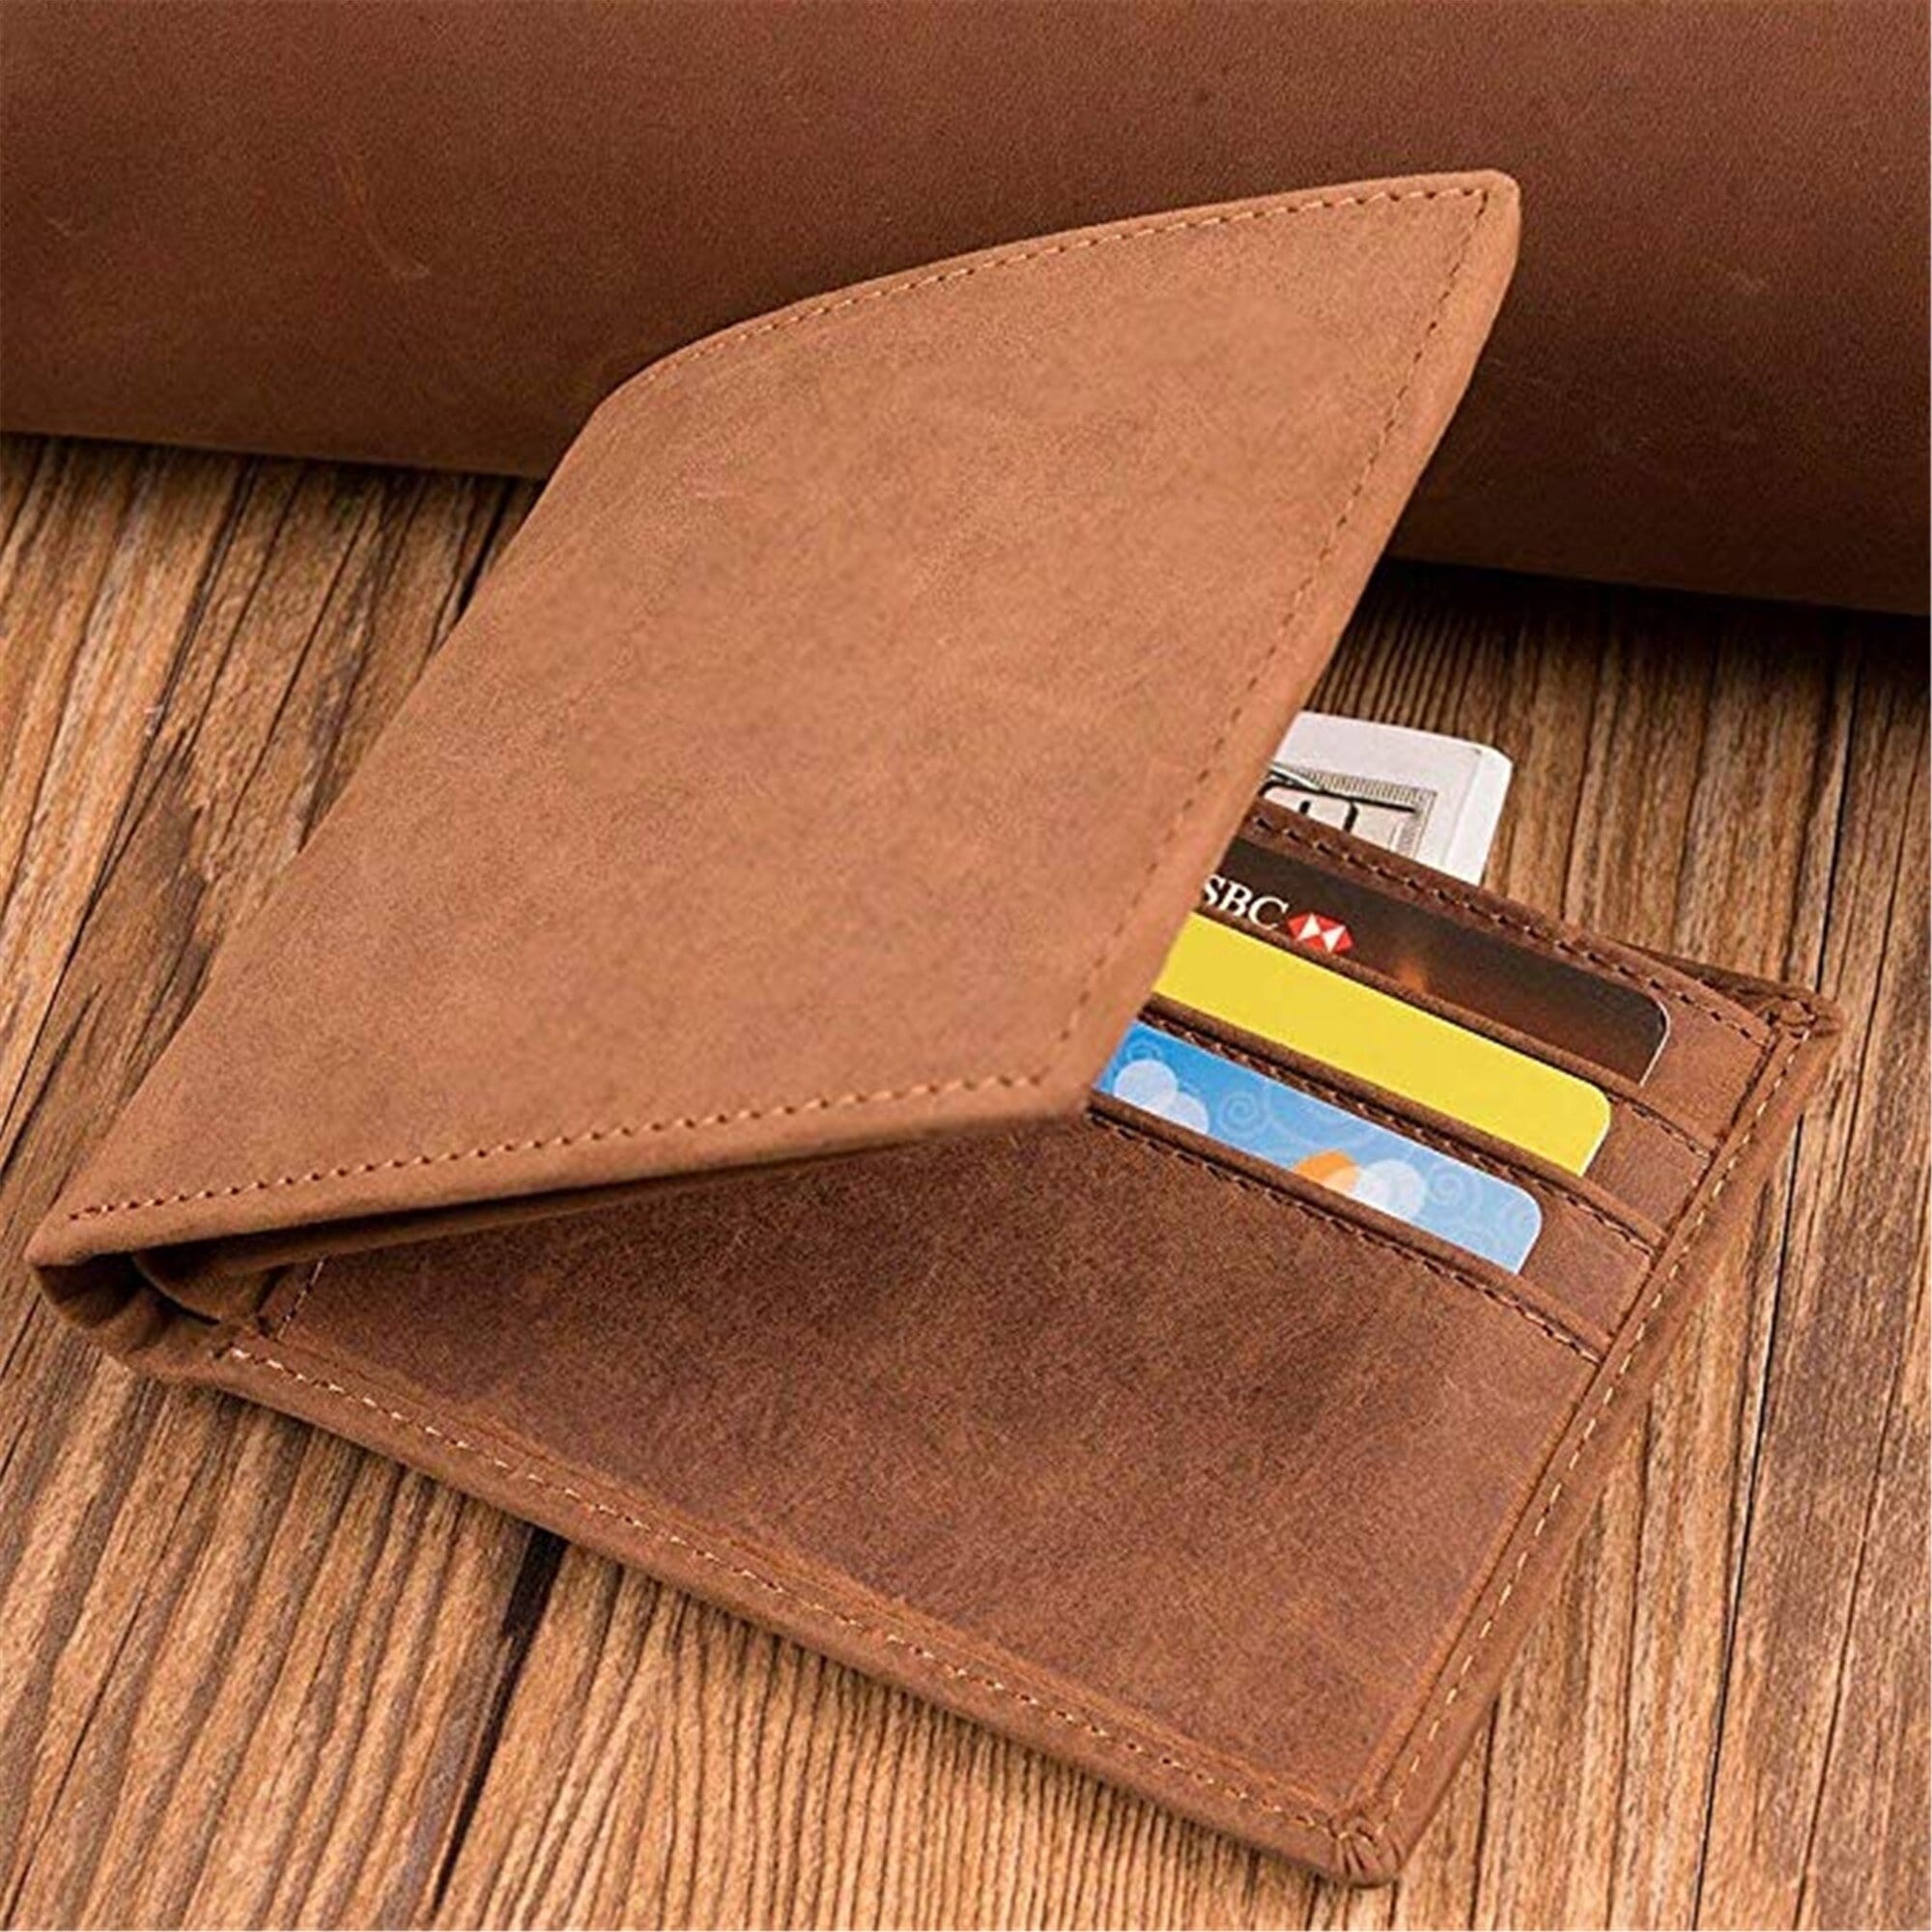 Wallets To Our Son - Never Forget That We Love You Bifold Leather Wallet Gift Card GiveMe-Gifts